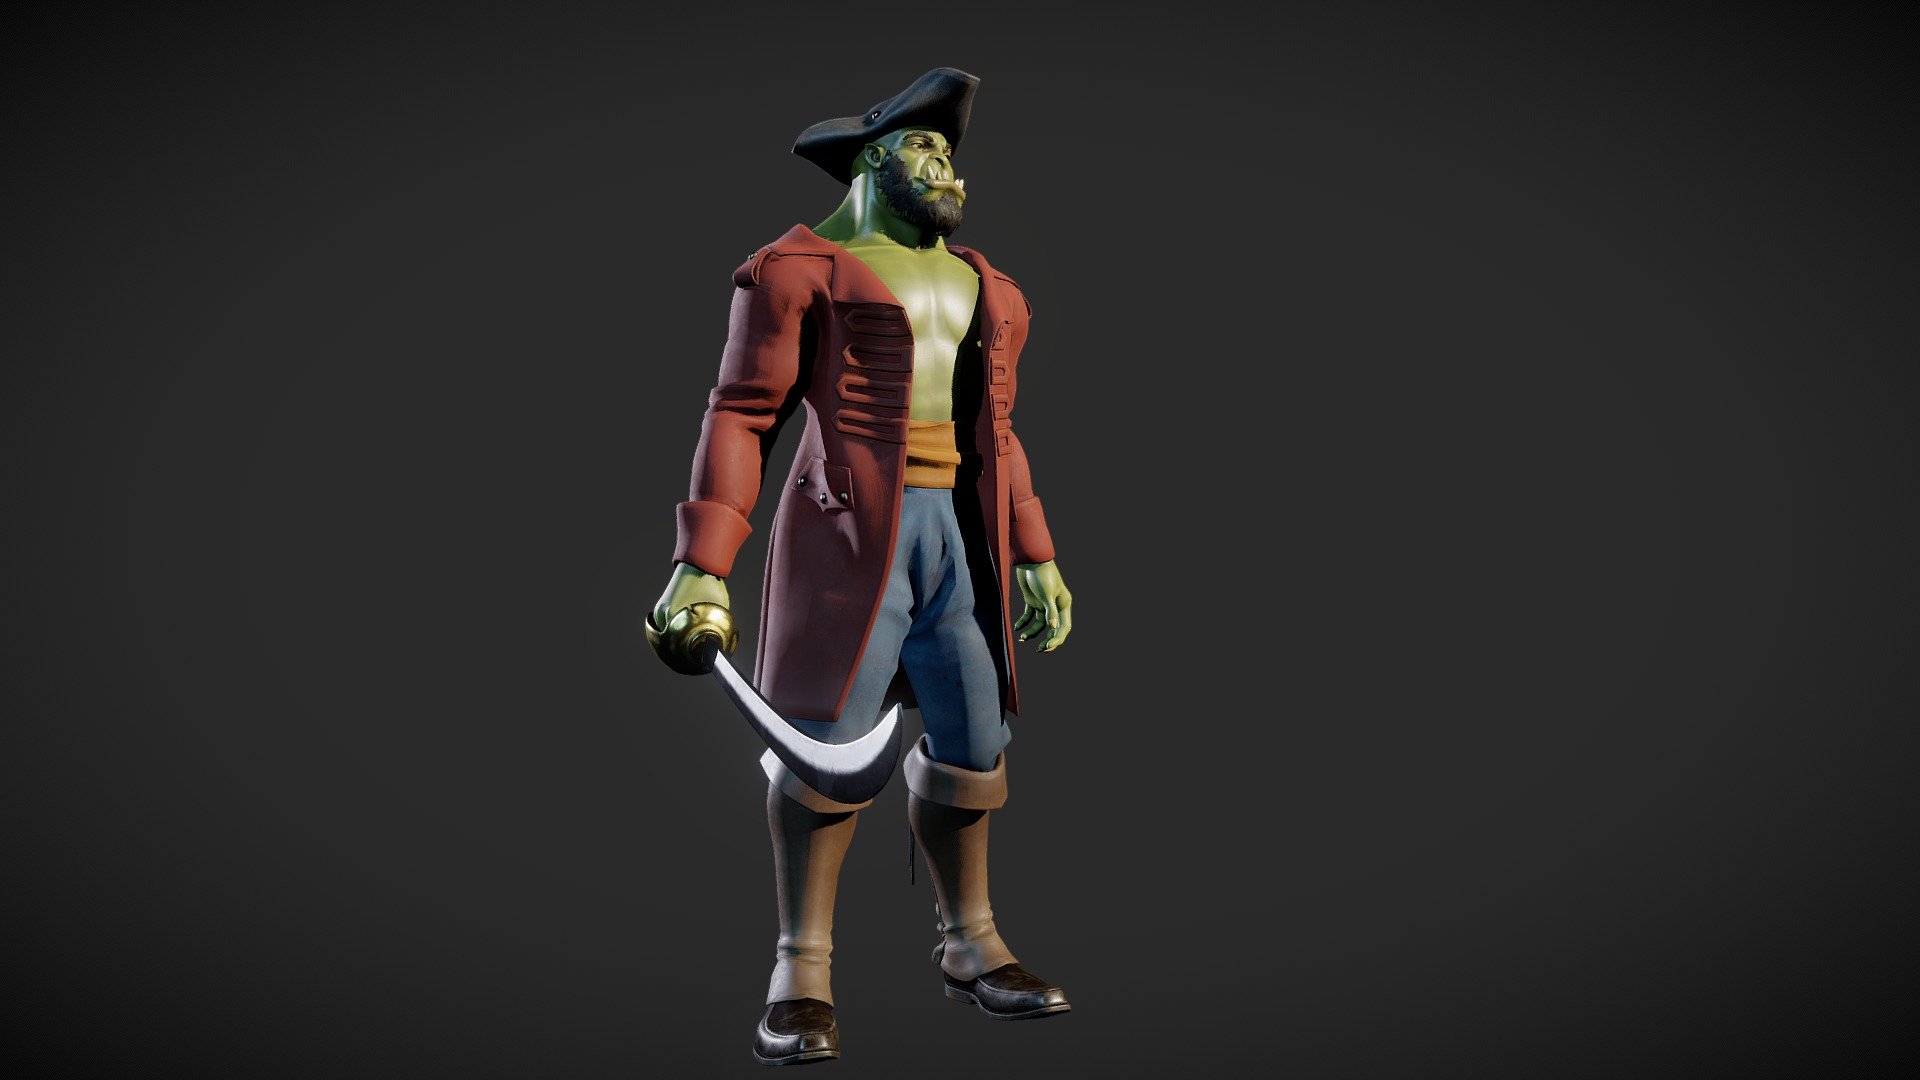 Orc Pirate that i've made for my personal portfolio 3d model